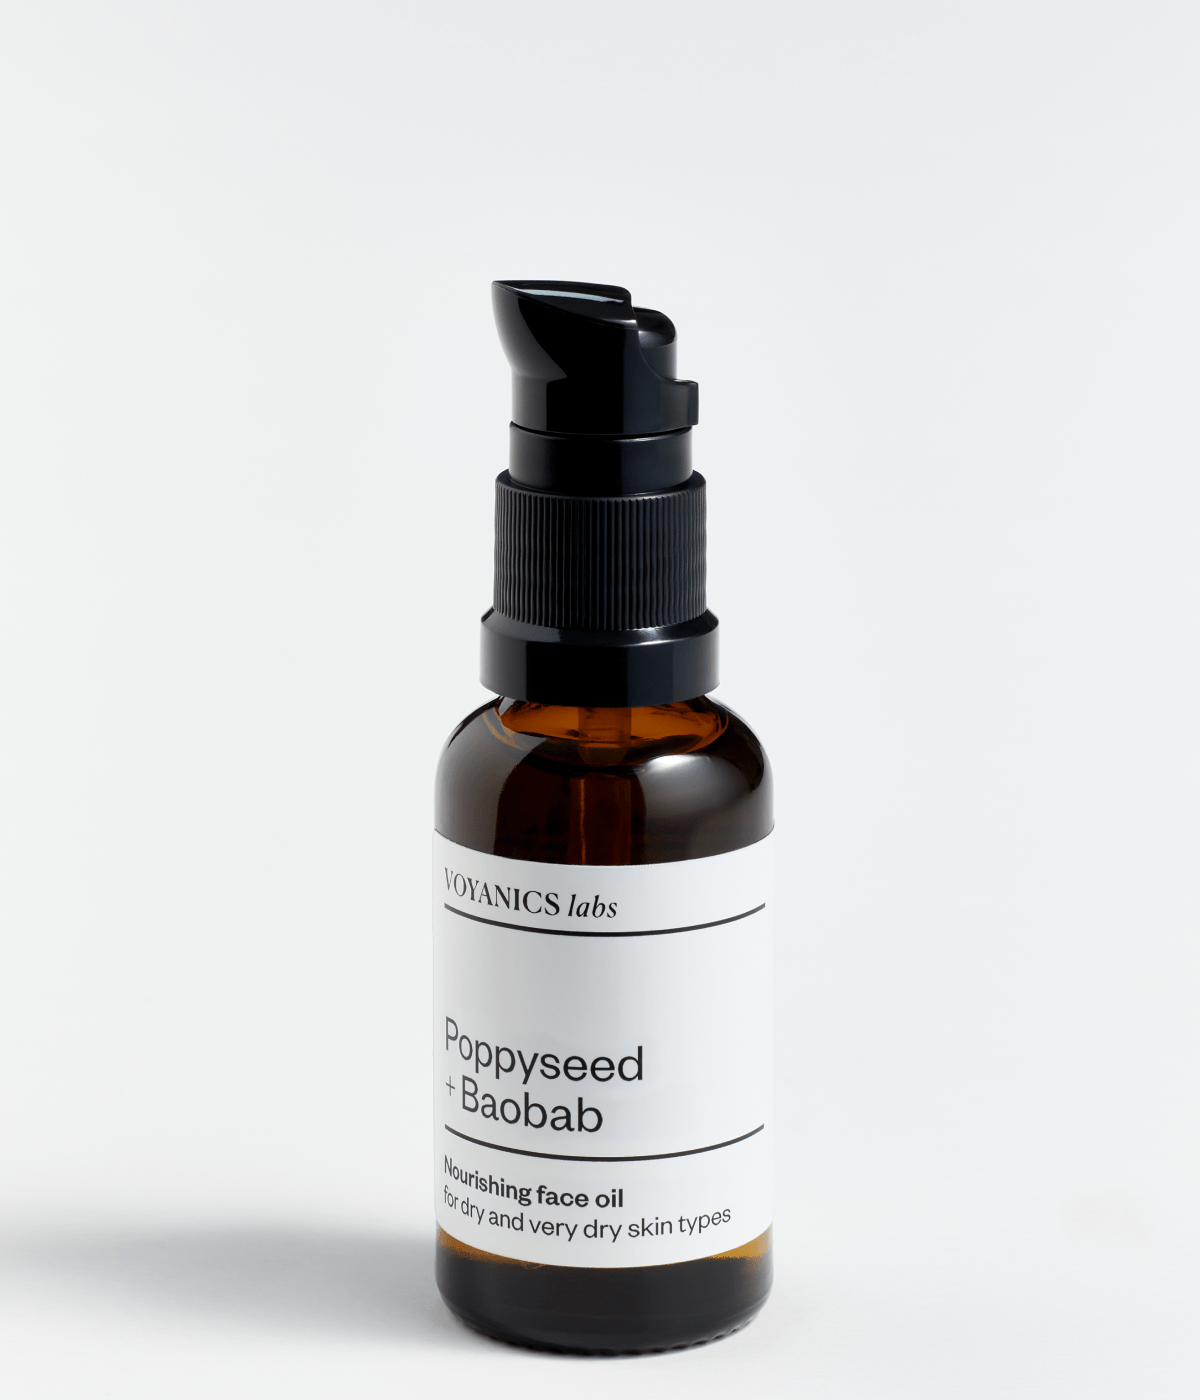 Poppyseed + Baobab nourishing face oil for dry and very dry skin types - Voyanics